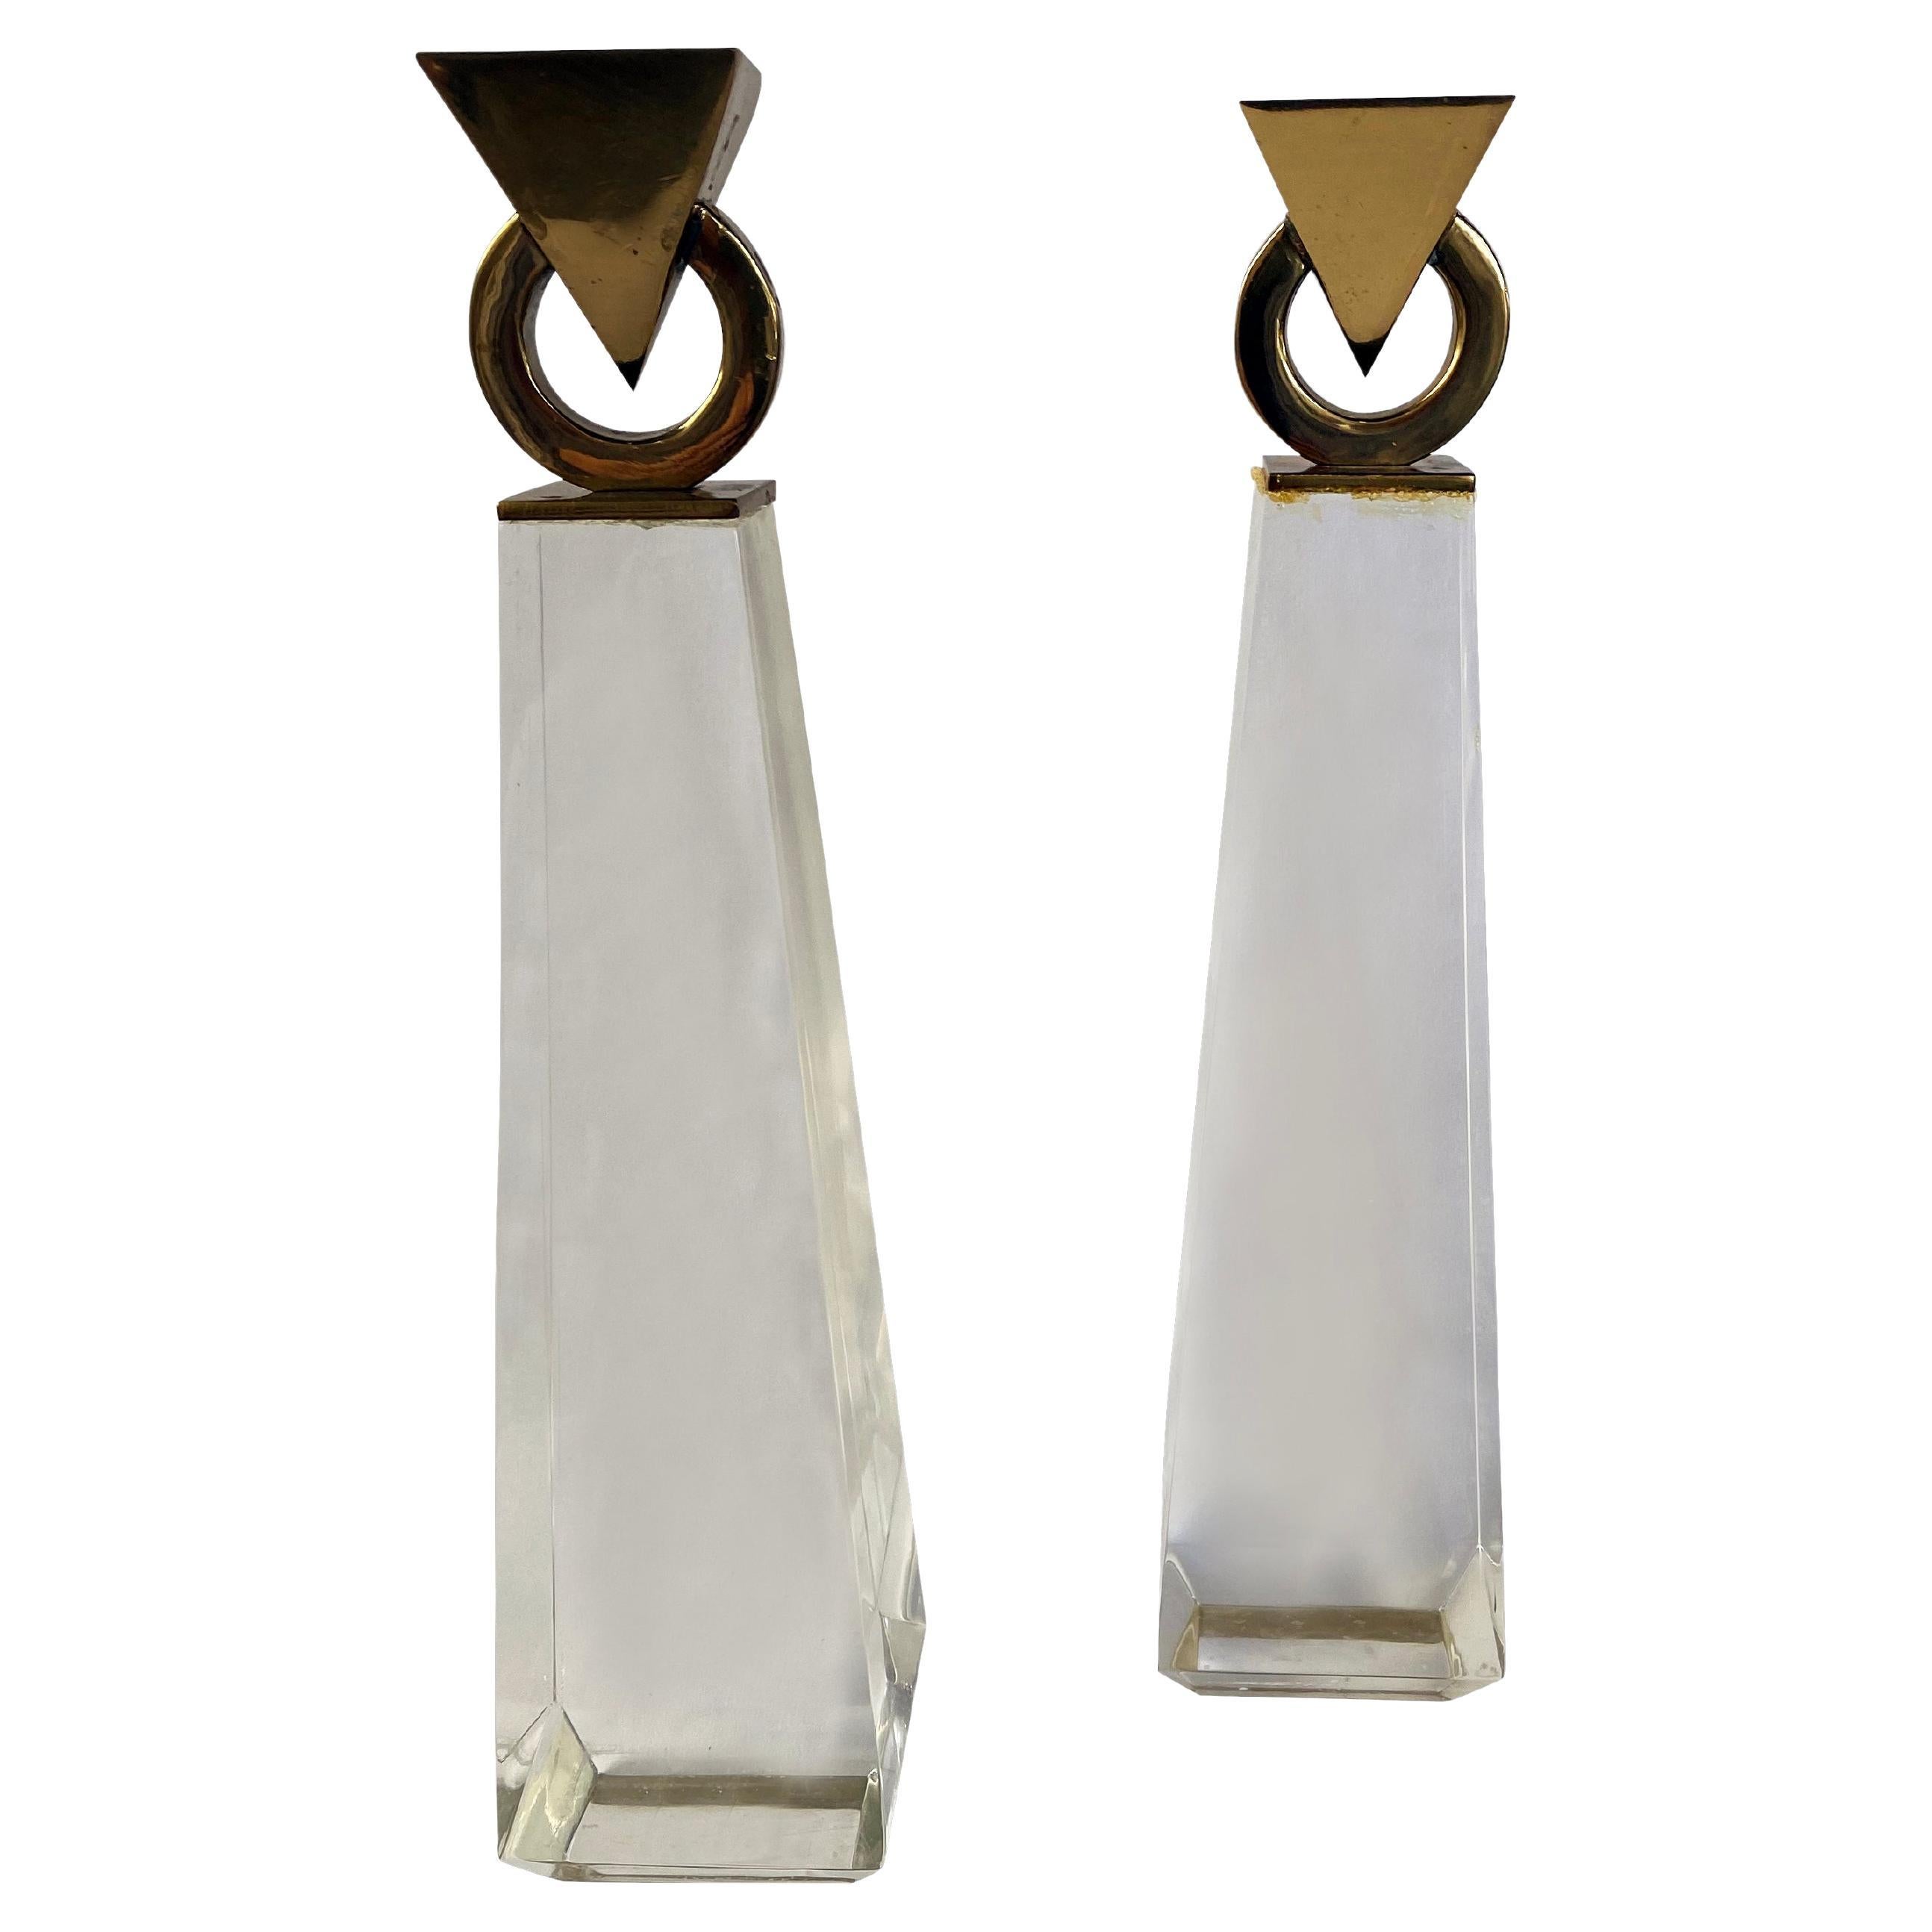 Pair of Vintage Lucite Obelisque Candle Stick Holders